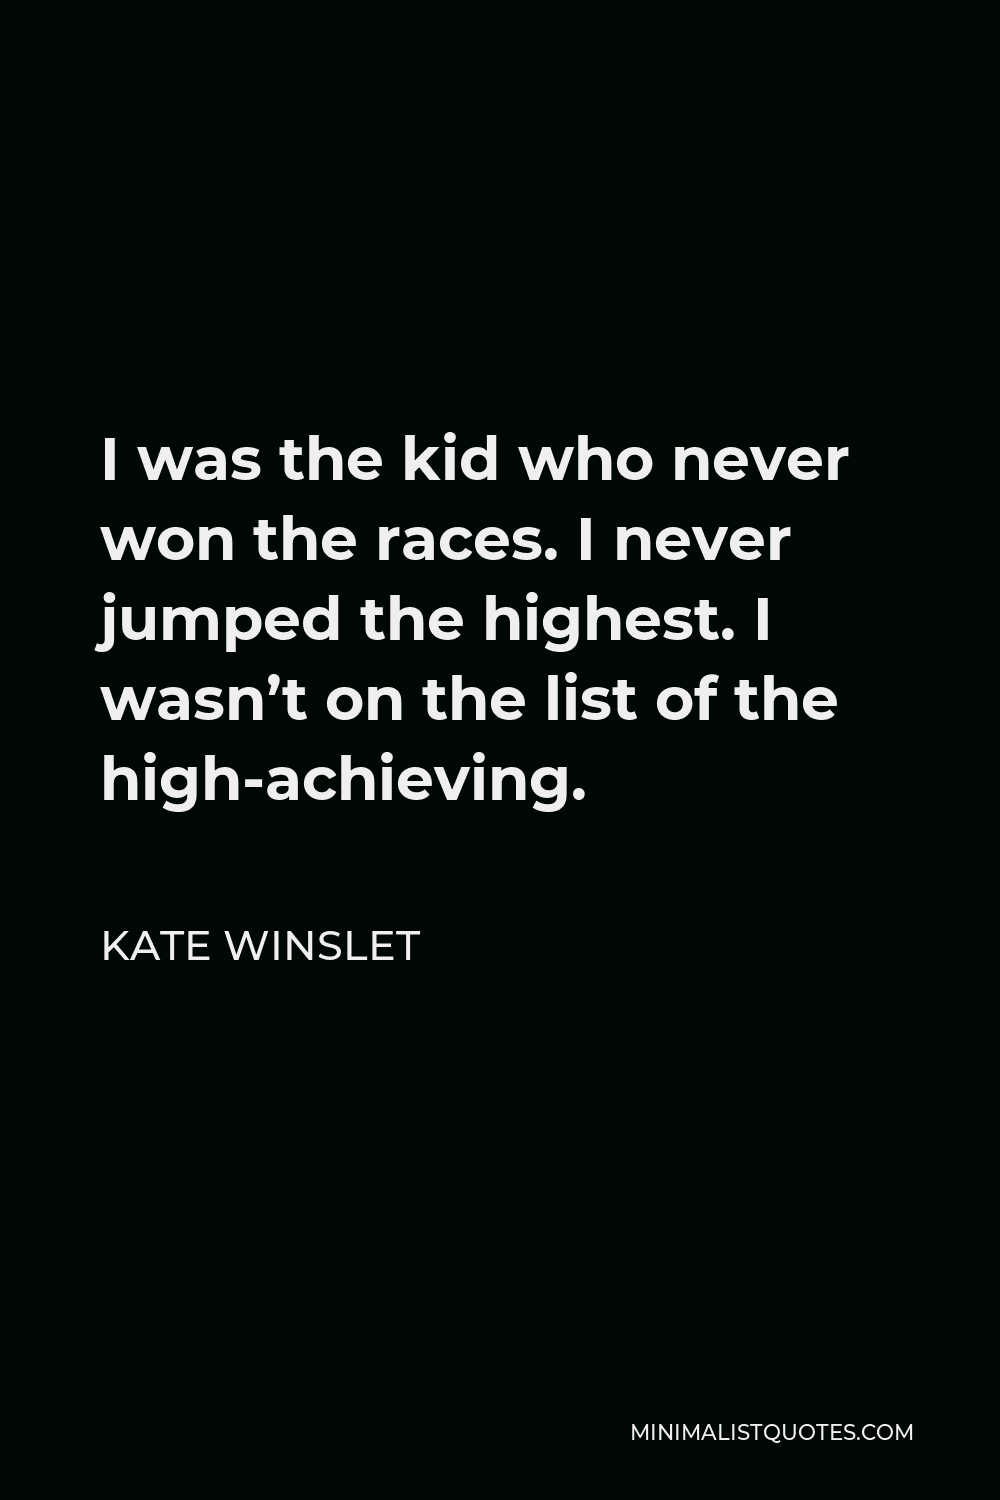 Kate Winslet Quote - I was the kid who never won the races. I never jumped the highest. I wasn’t on the list of the high-achieving.